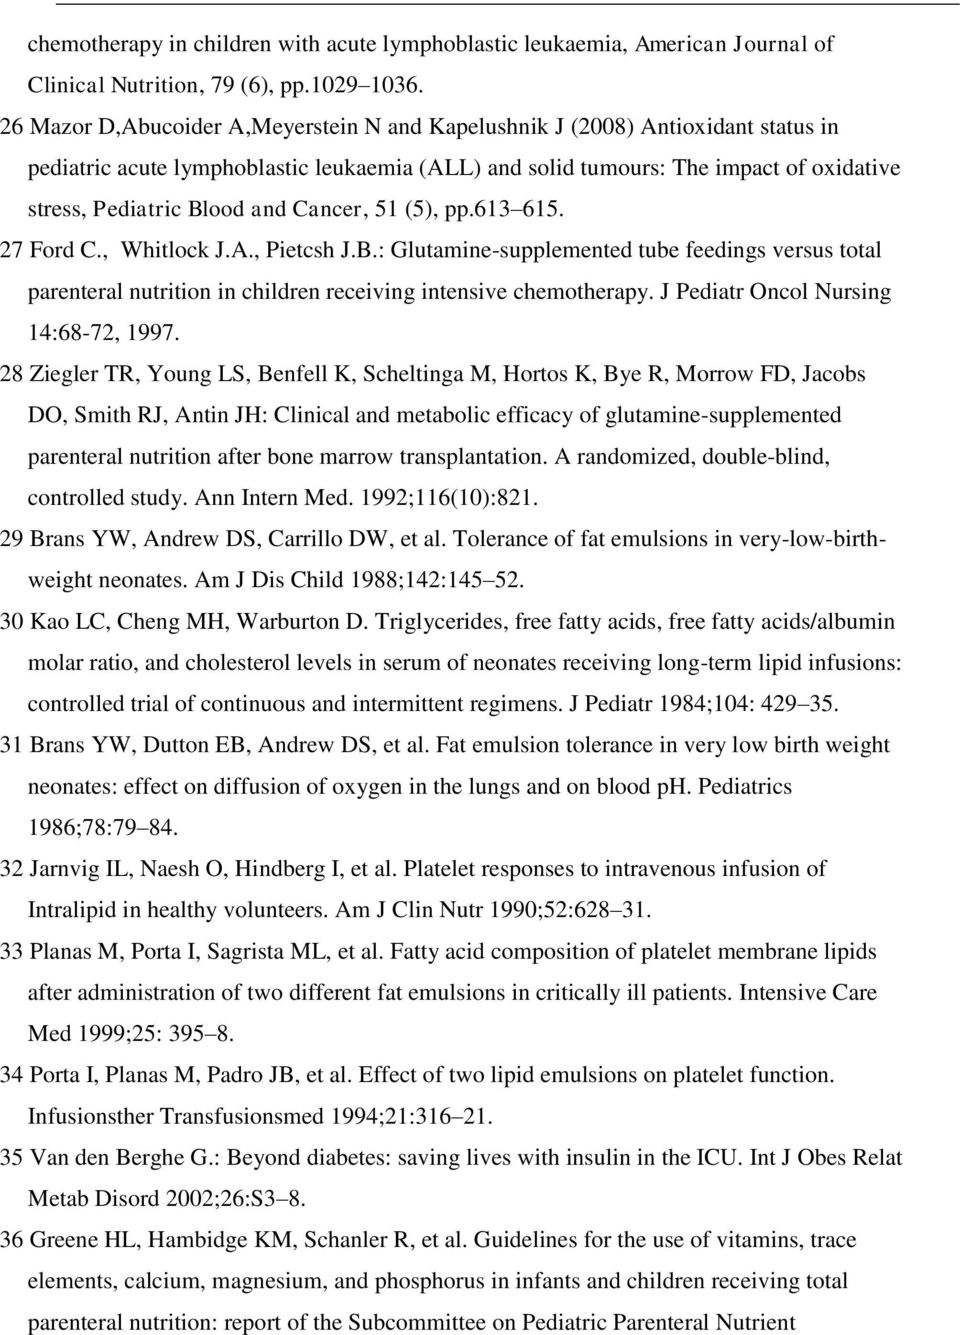 Cancer, 51 (5), pp.613 615. 27 Ford C., Whitlock J.A., Pietcsh J.B.: Glutamine-supplemented tube feedings versus total parenteral nutrition in children receiving intensive chemotherapy.